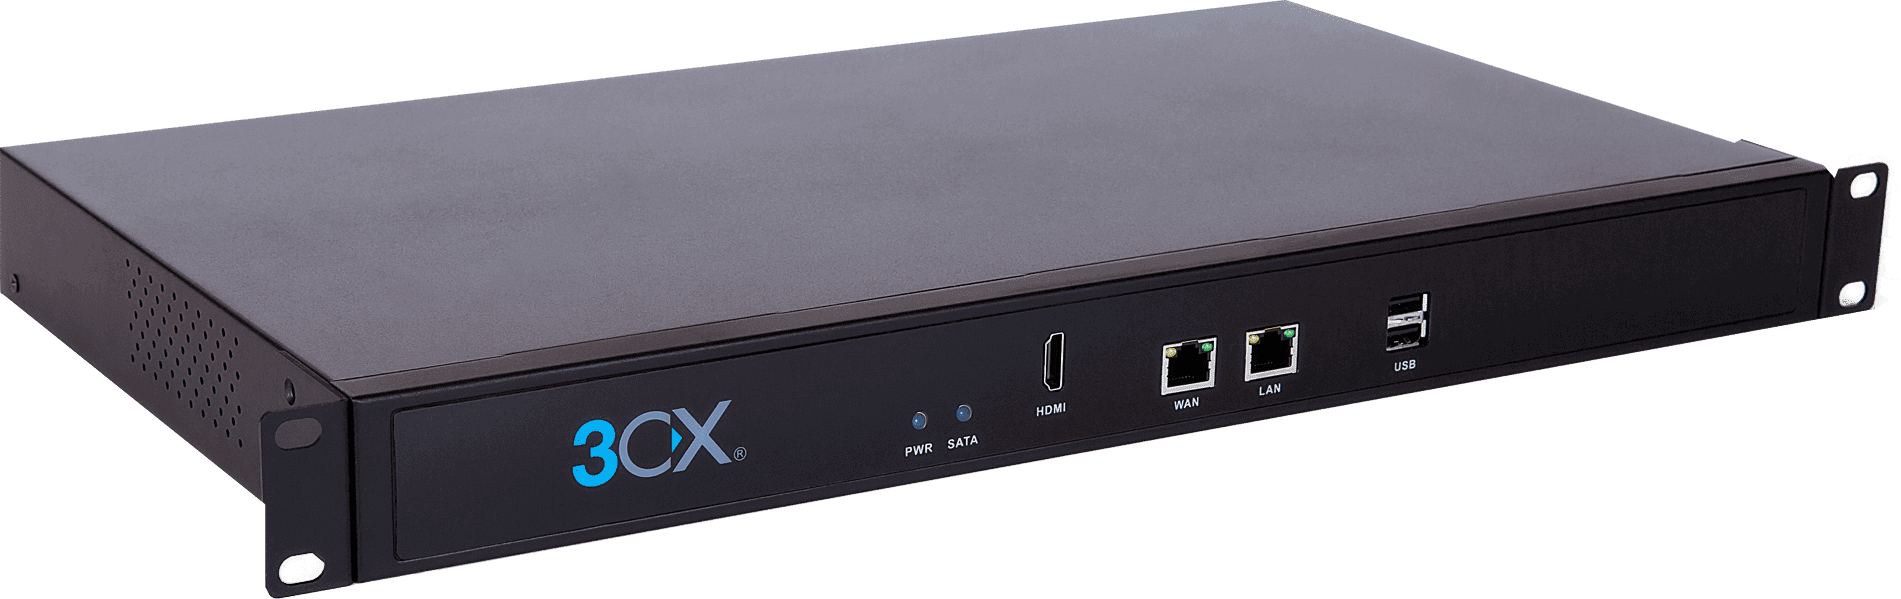 3CX certified appliance available in Qatar now